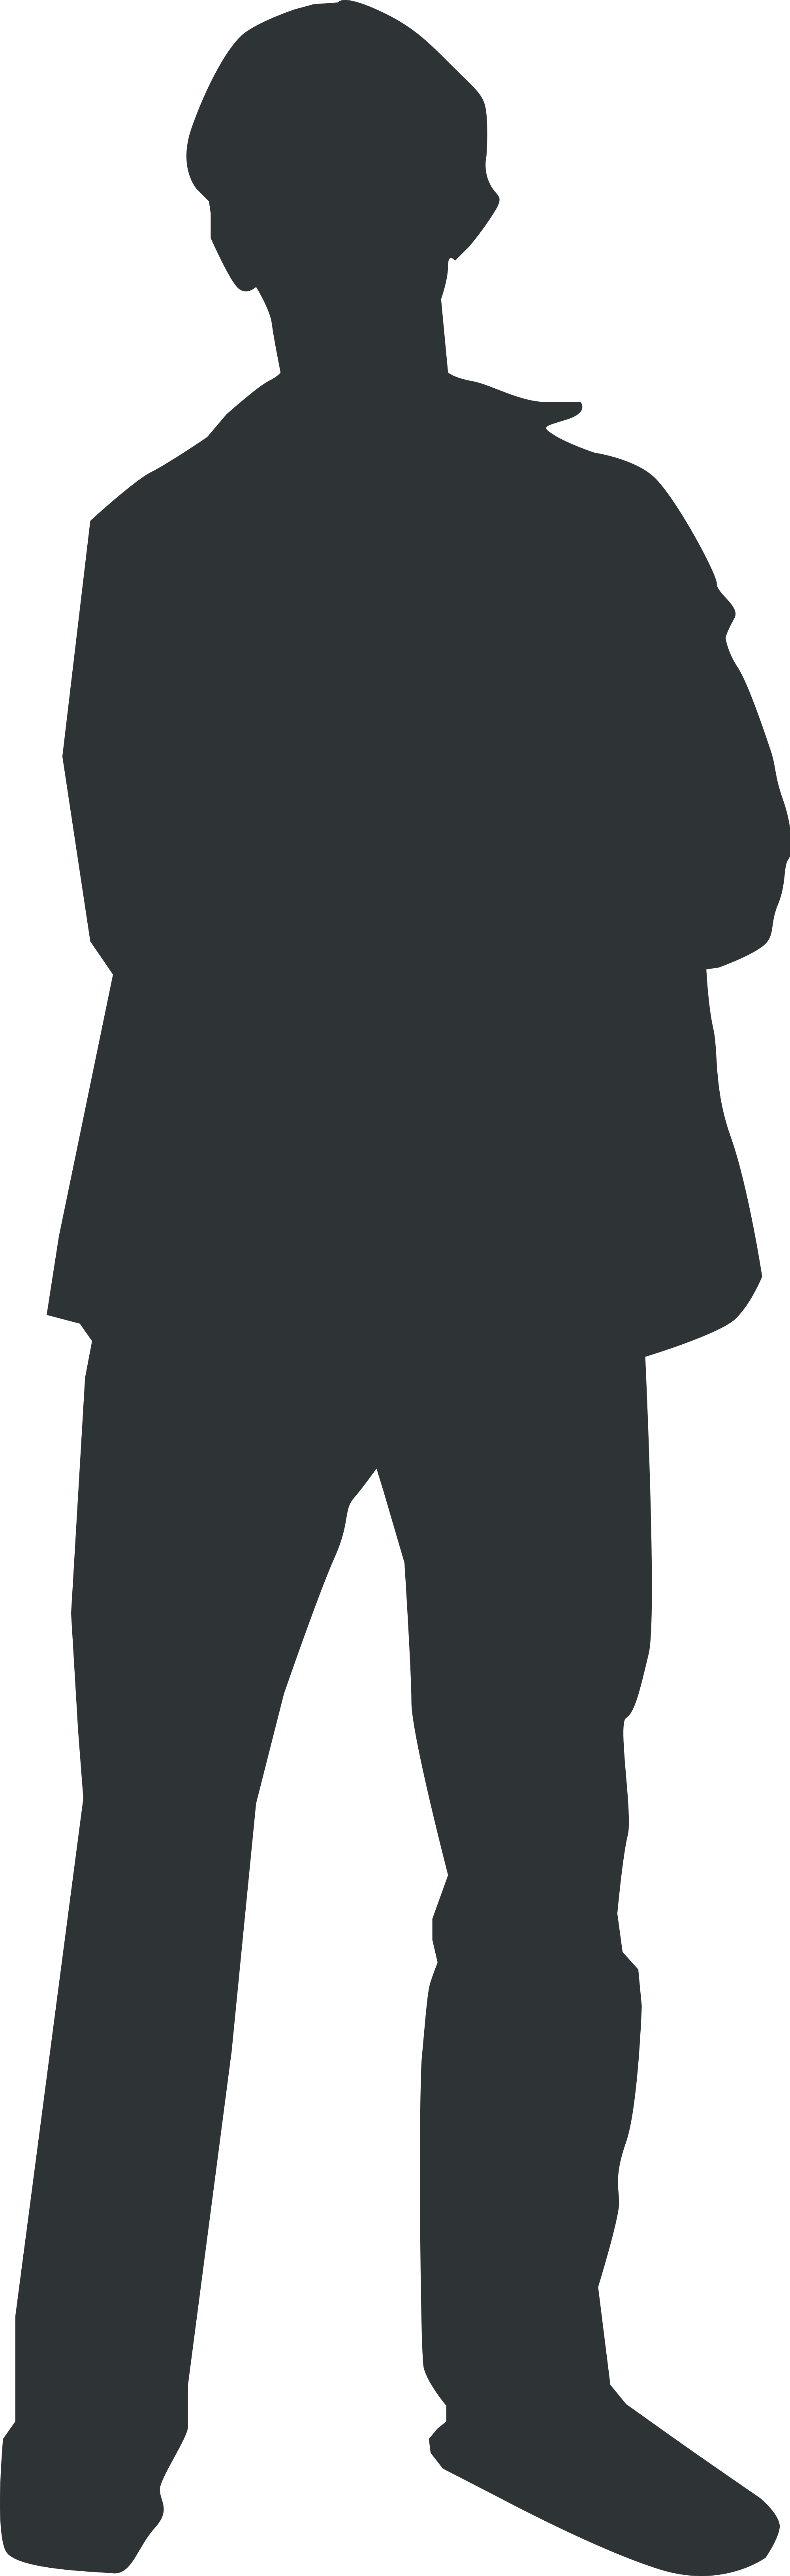 Free Person Outline, Download Free Person Outline png images, Free